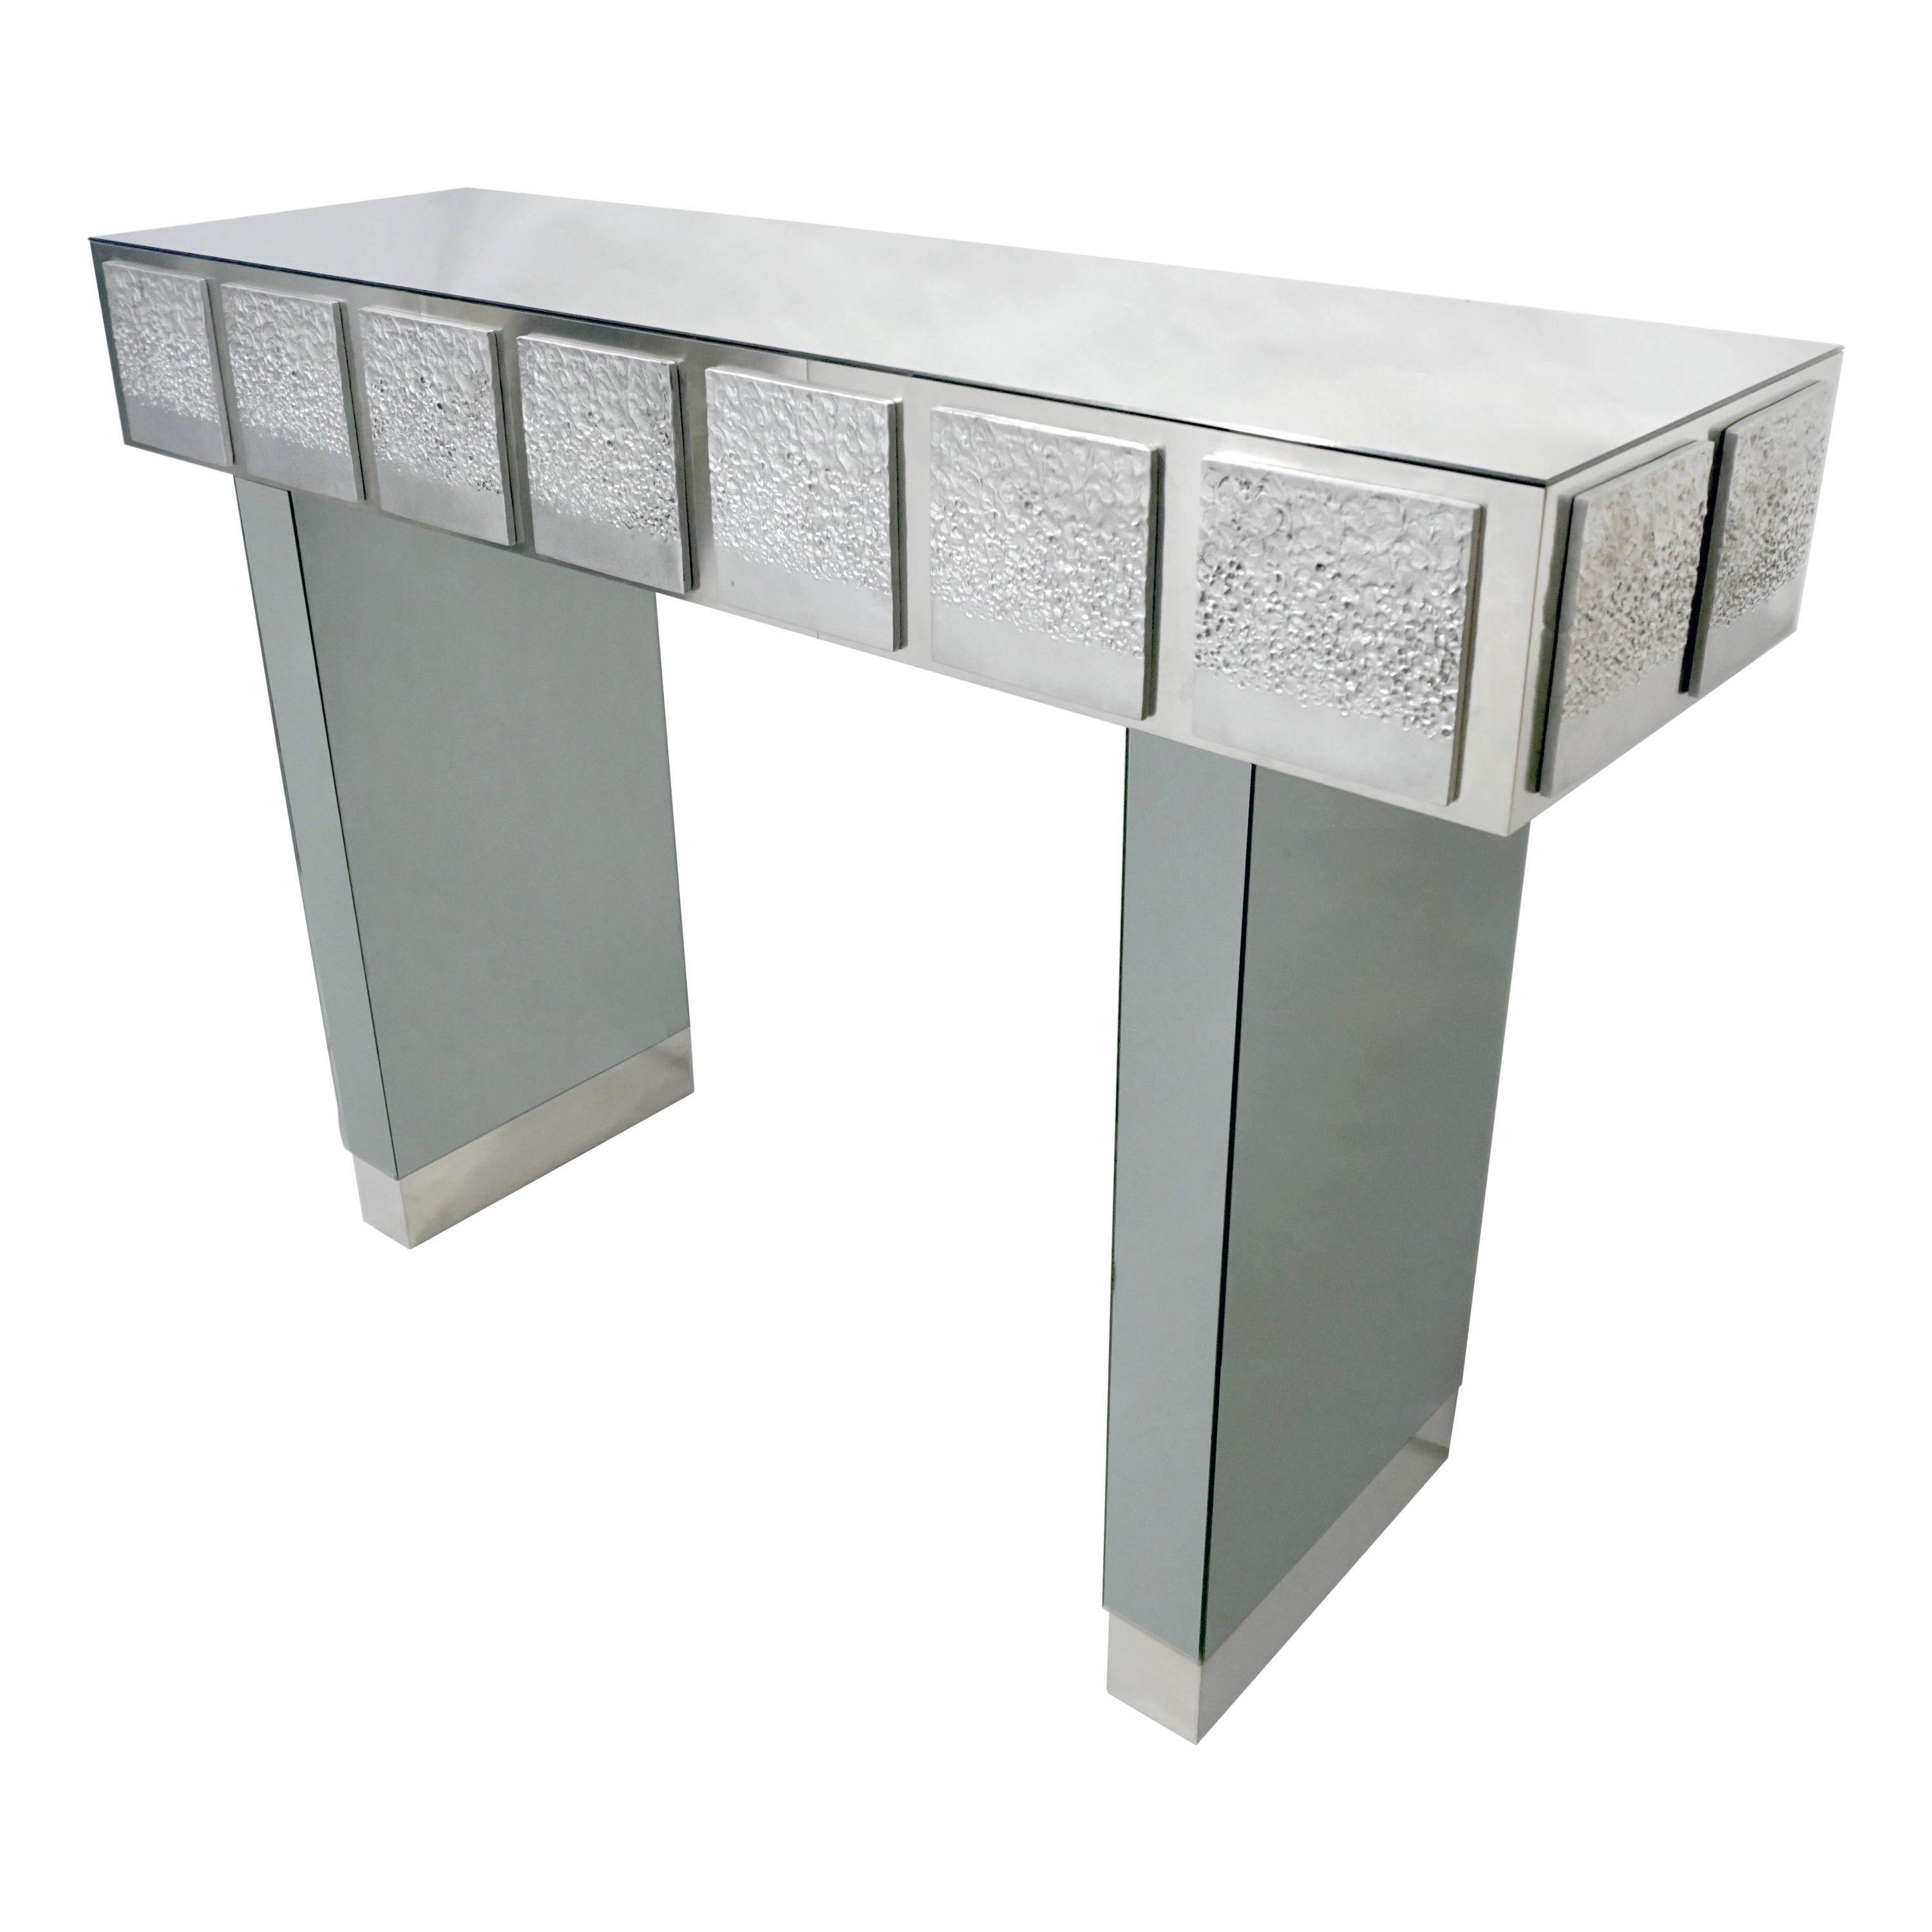 Bespoke Italian Contemporary One-of-a-Kind Polished Steel Smoked Mirror Console For Sale